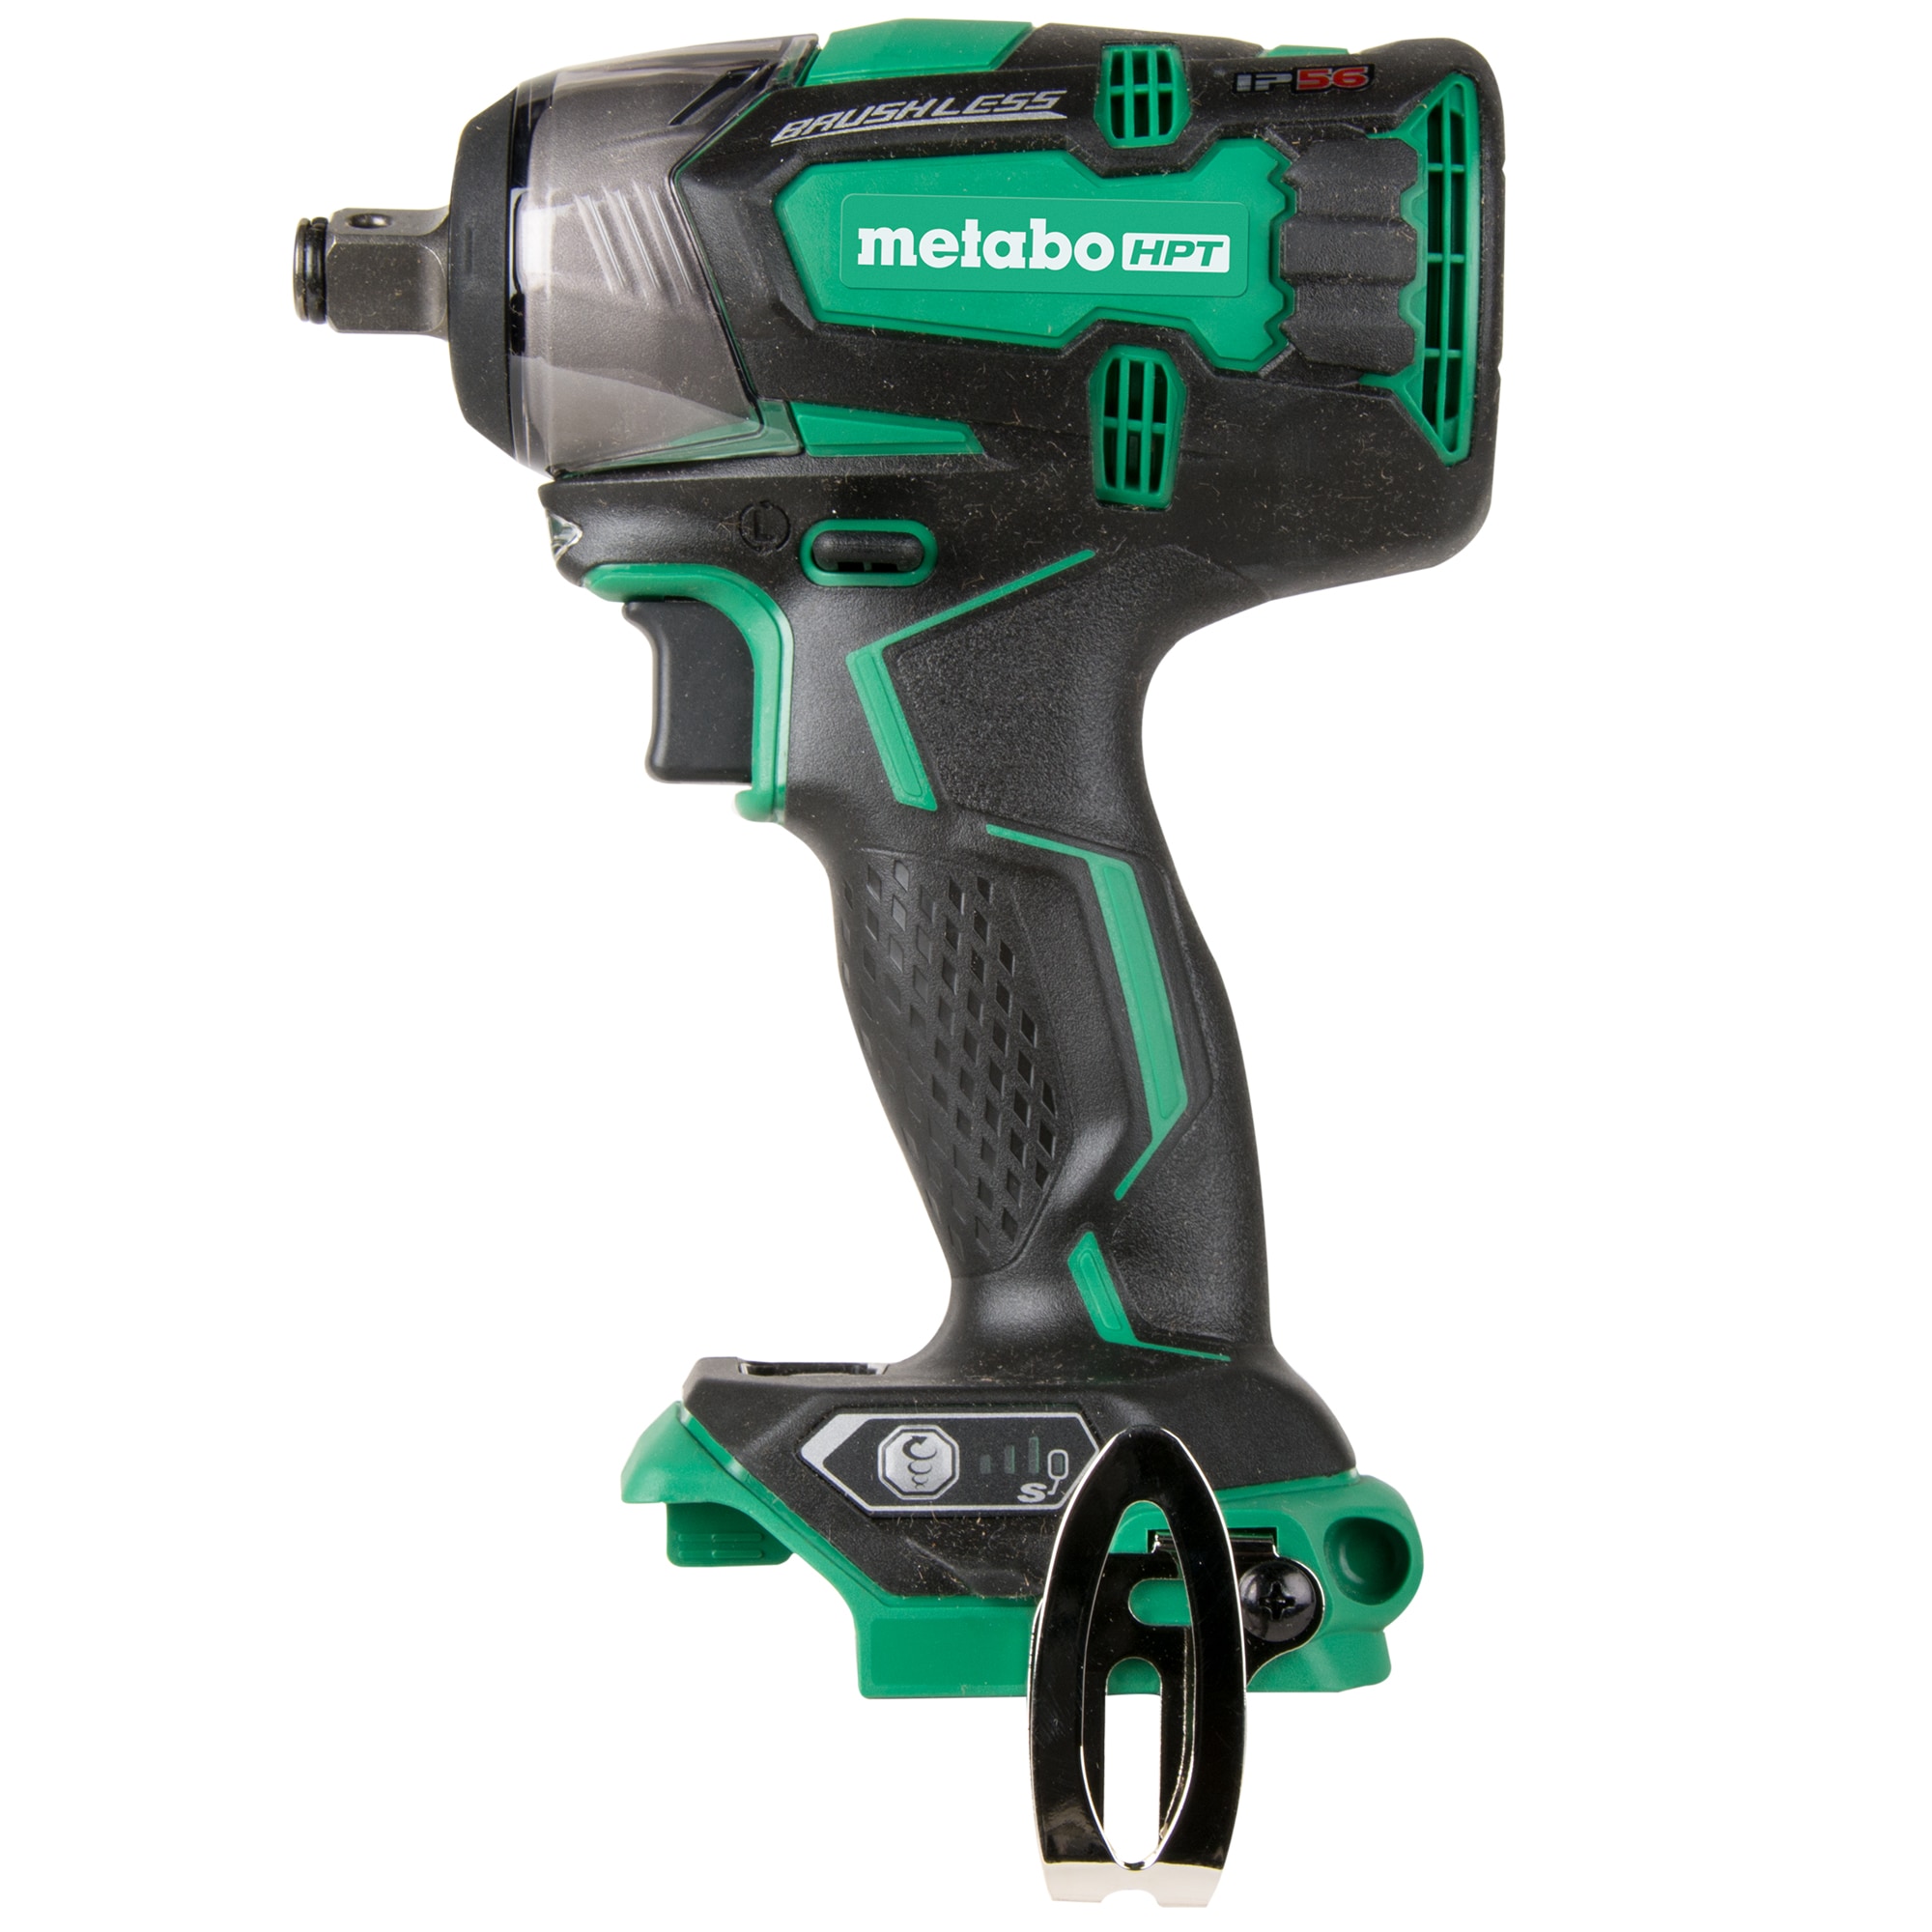 MultiVolt 18-volt Variable Speed Brushless 1/2-in Drive Cordless Impact Wrench (Bare Tool) in Green | - Metabo HPT WR18DBDL2Q4M